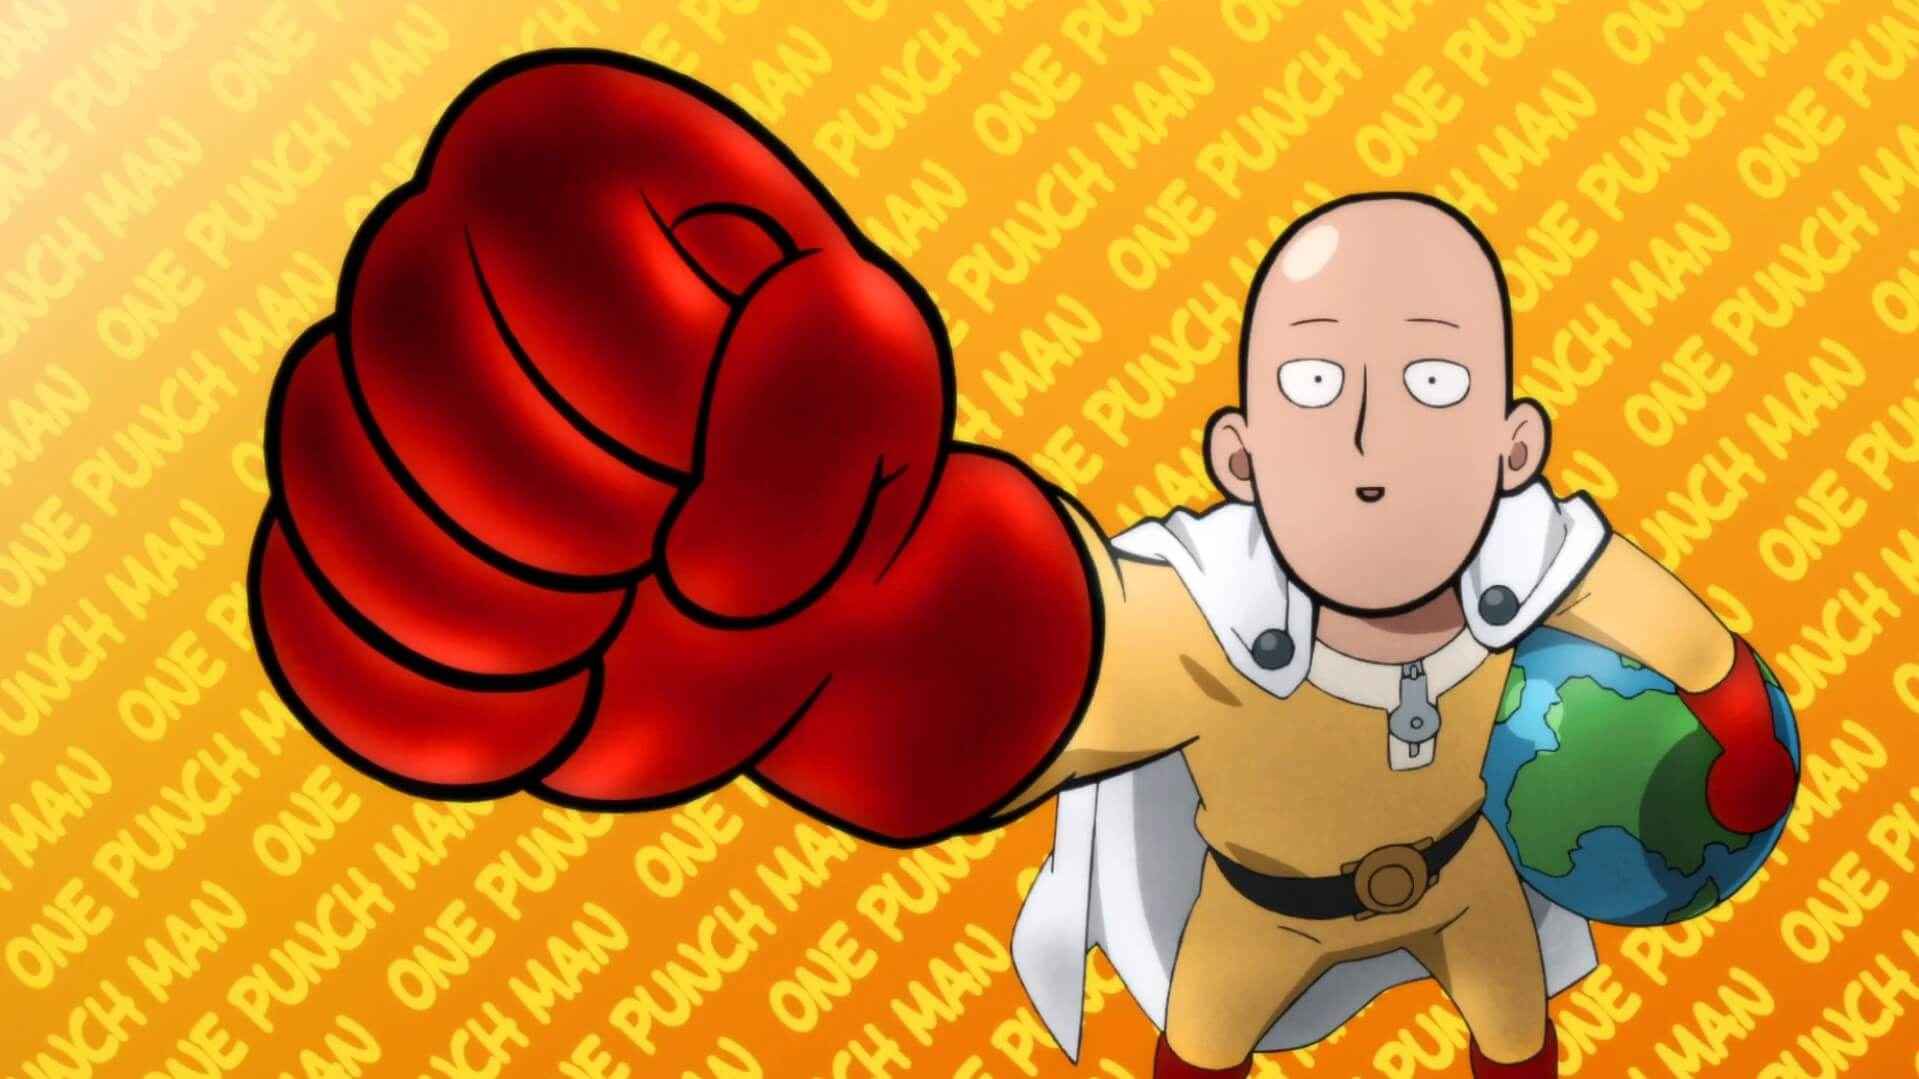 When Does 'One Punch Man' Episode 24 Air?